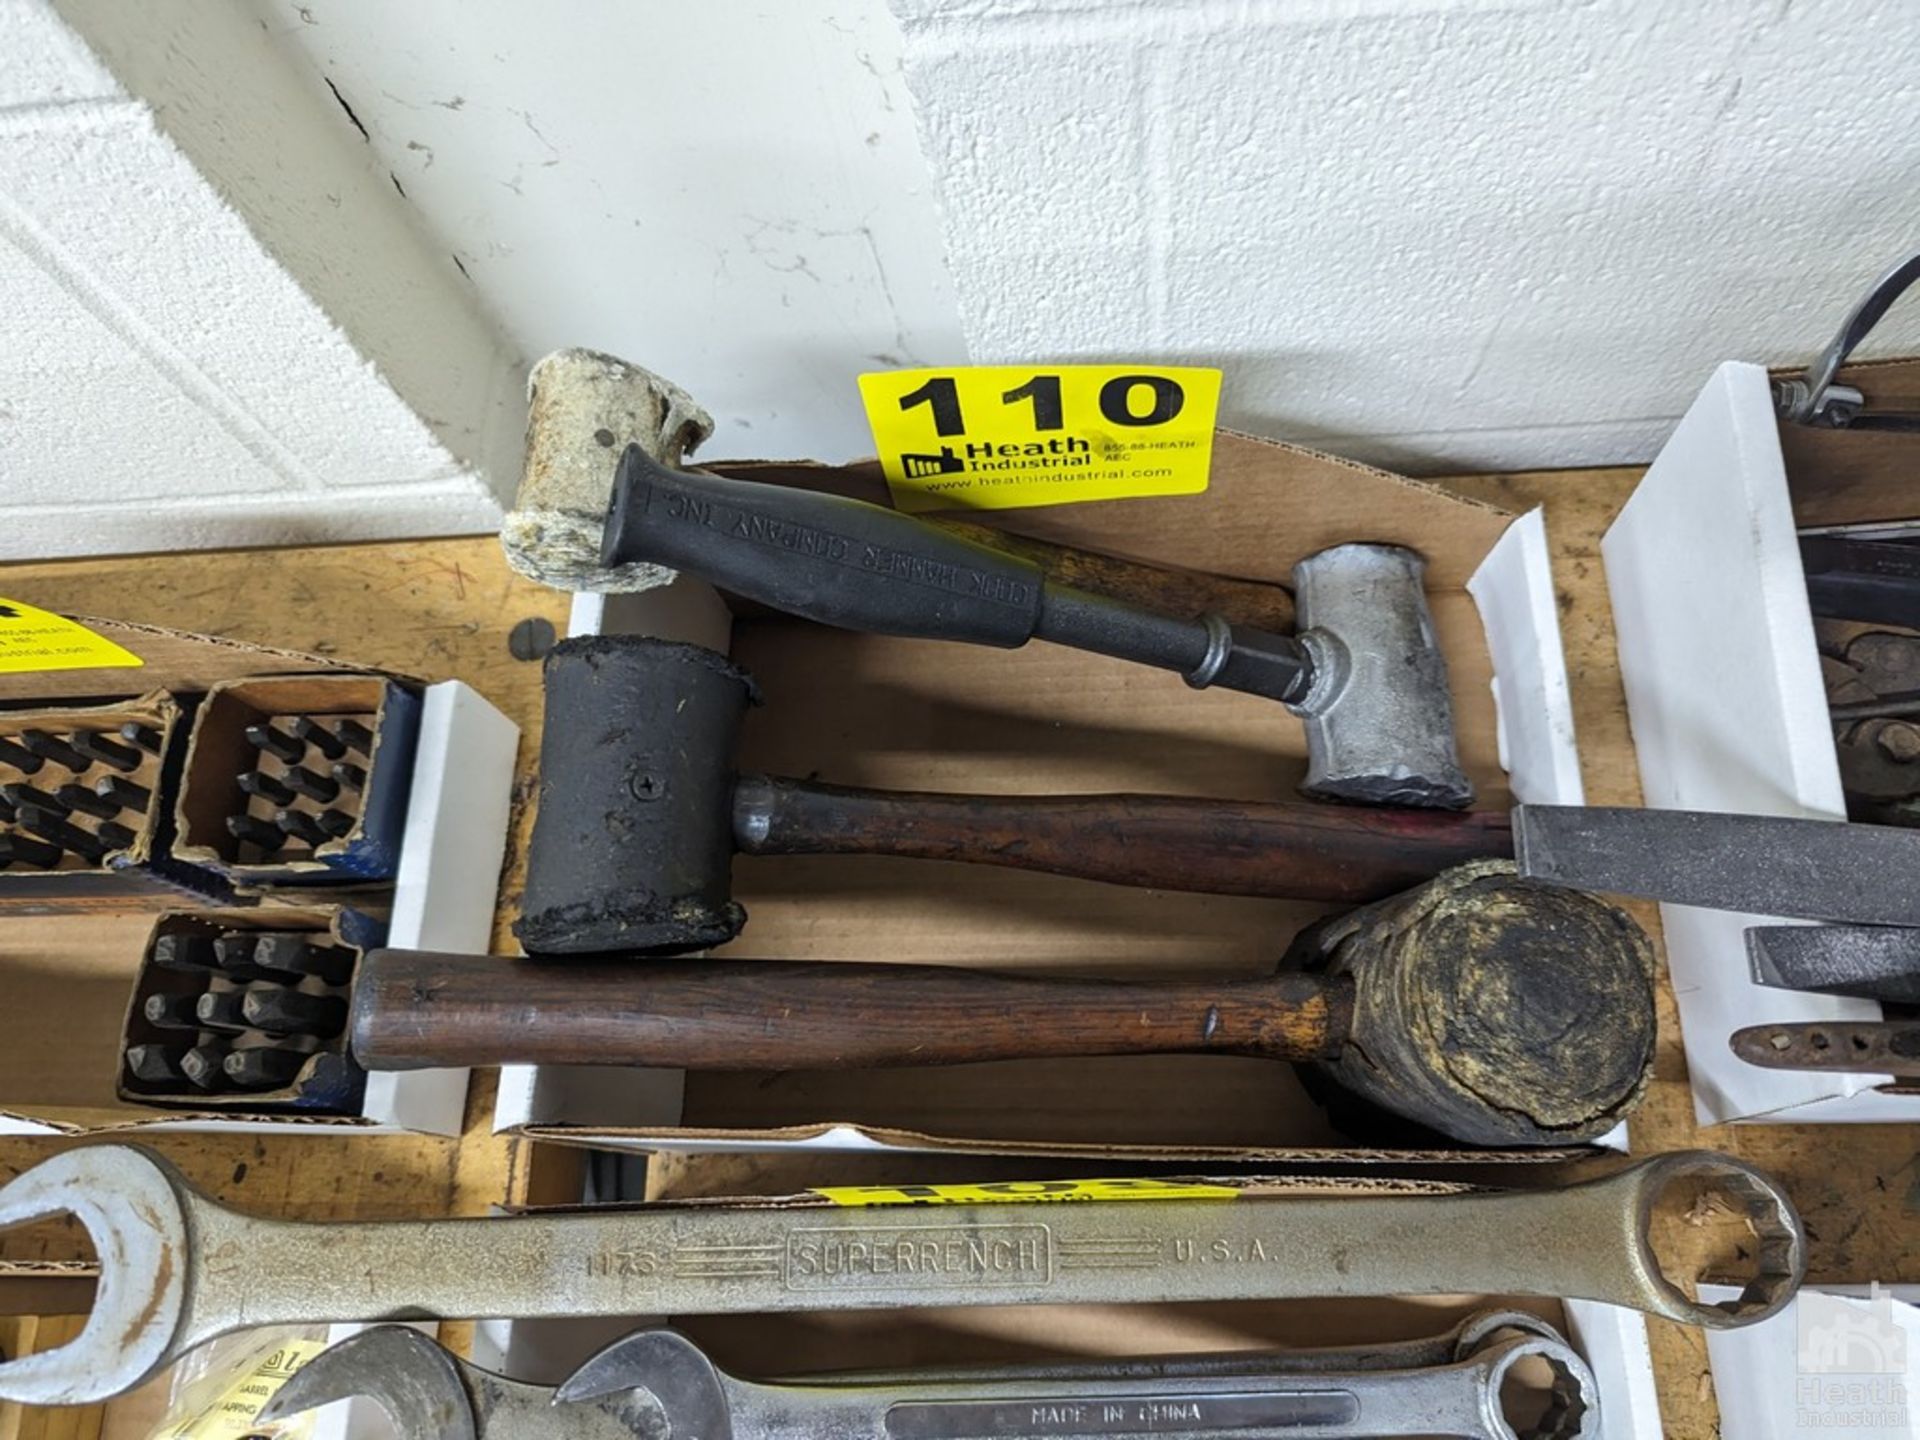 (4) ASSORTED MALLETS IN BOX